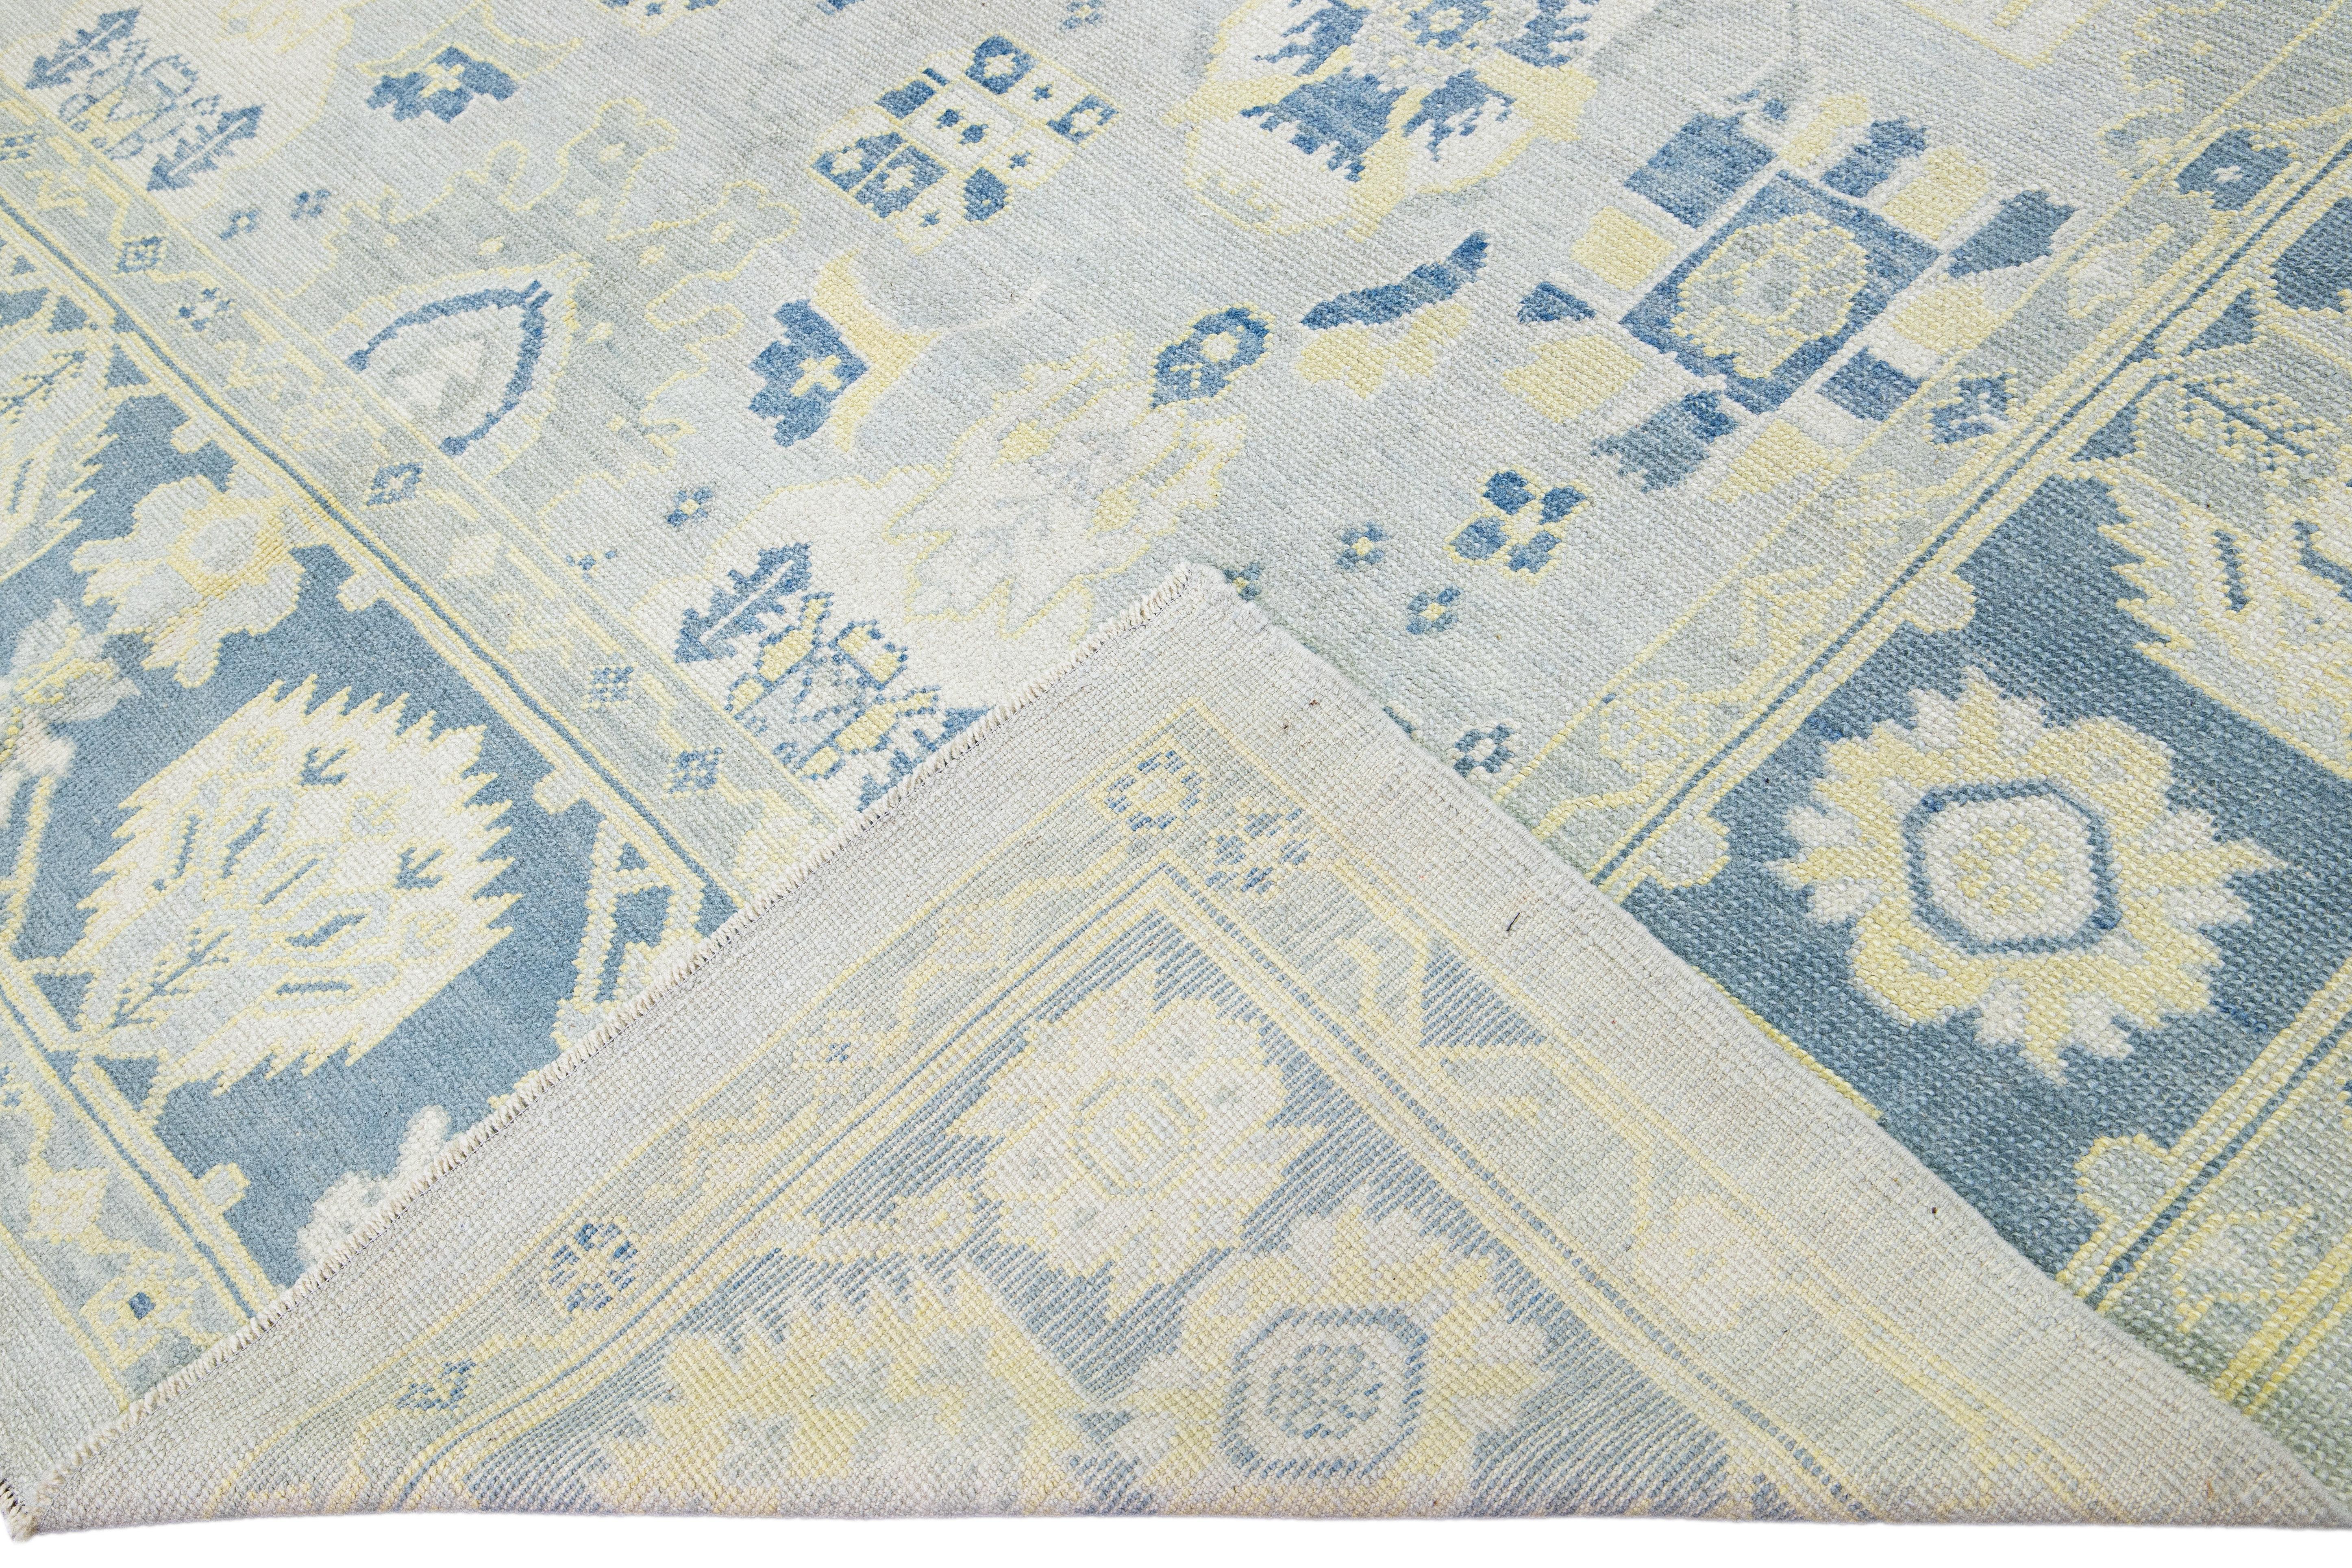 Beautiful modern Oushak hand-knotted wool rug with a gray field. This Oushak rug has blue and yellow accents that feature a gorgeous geometric floral motif. 

This rug measures: 9' x 12'4